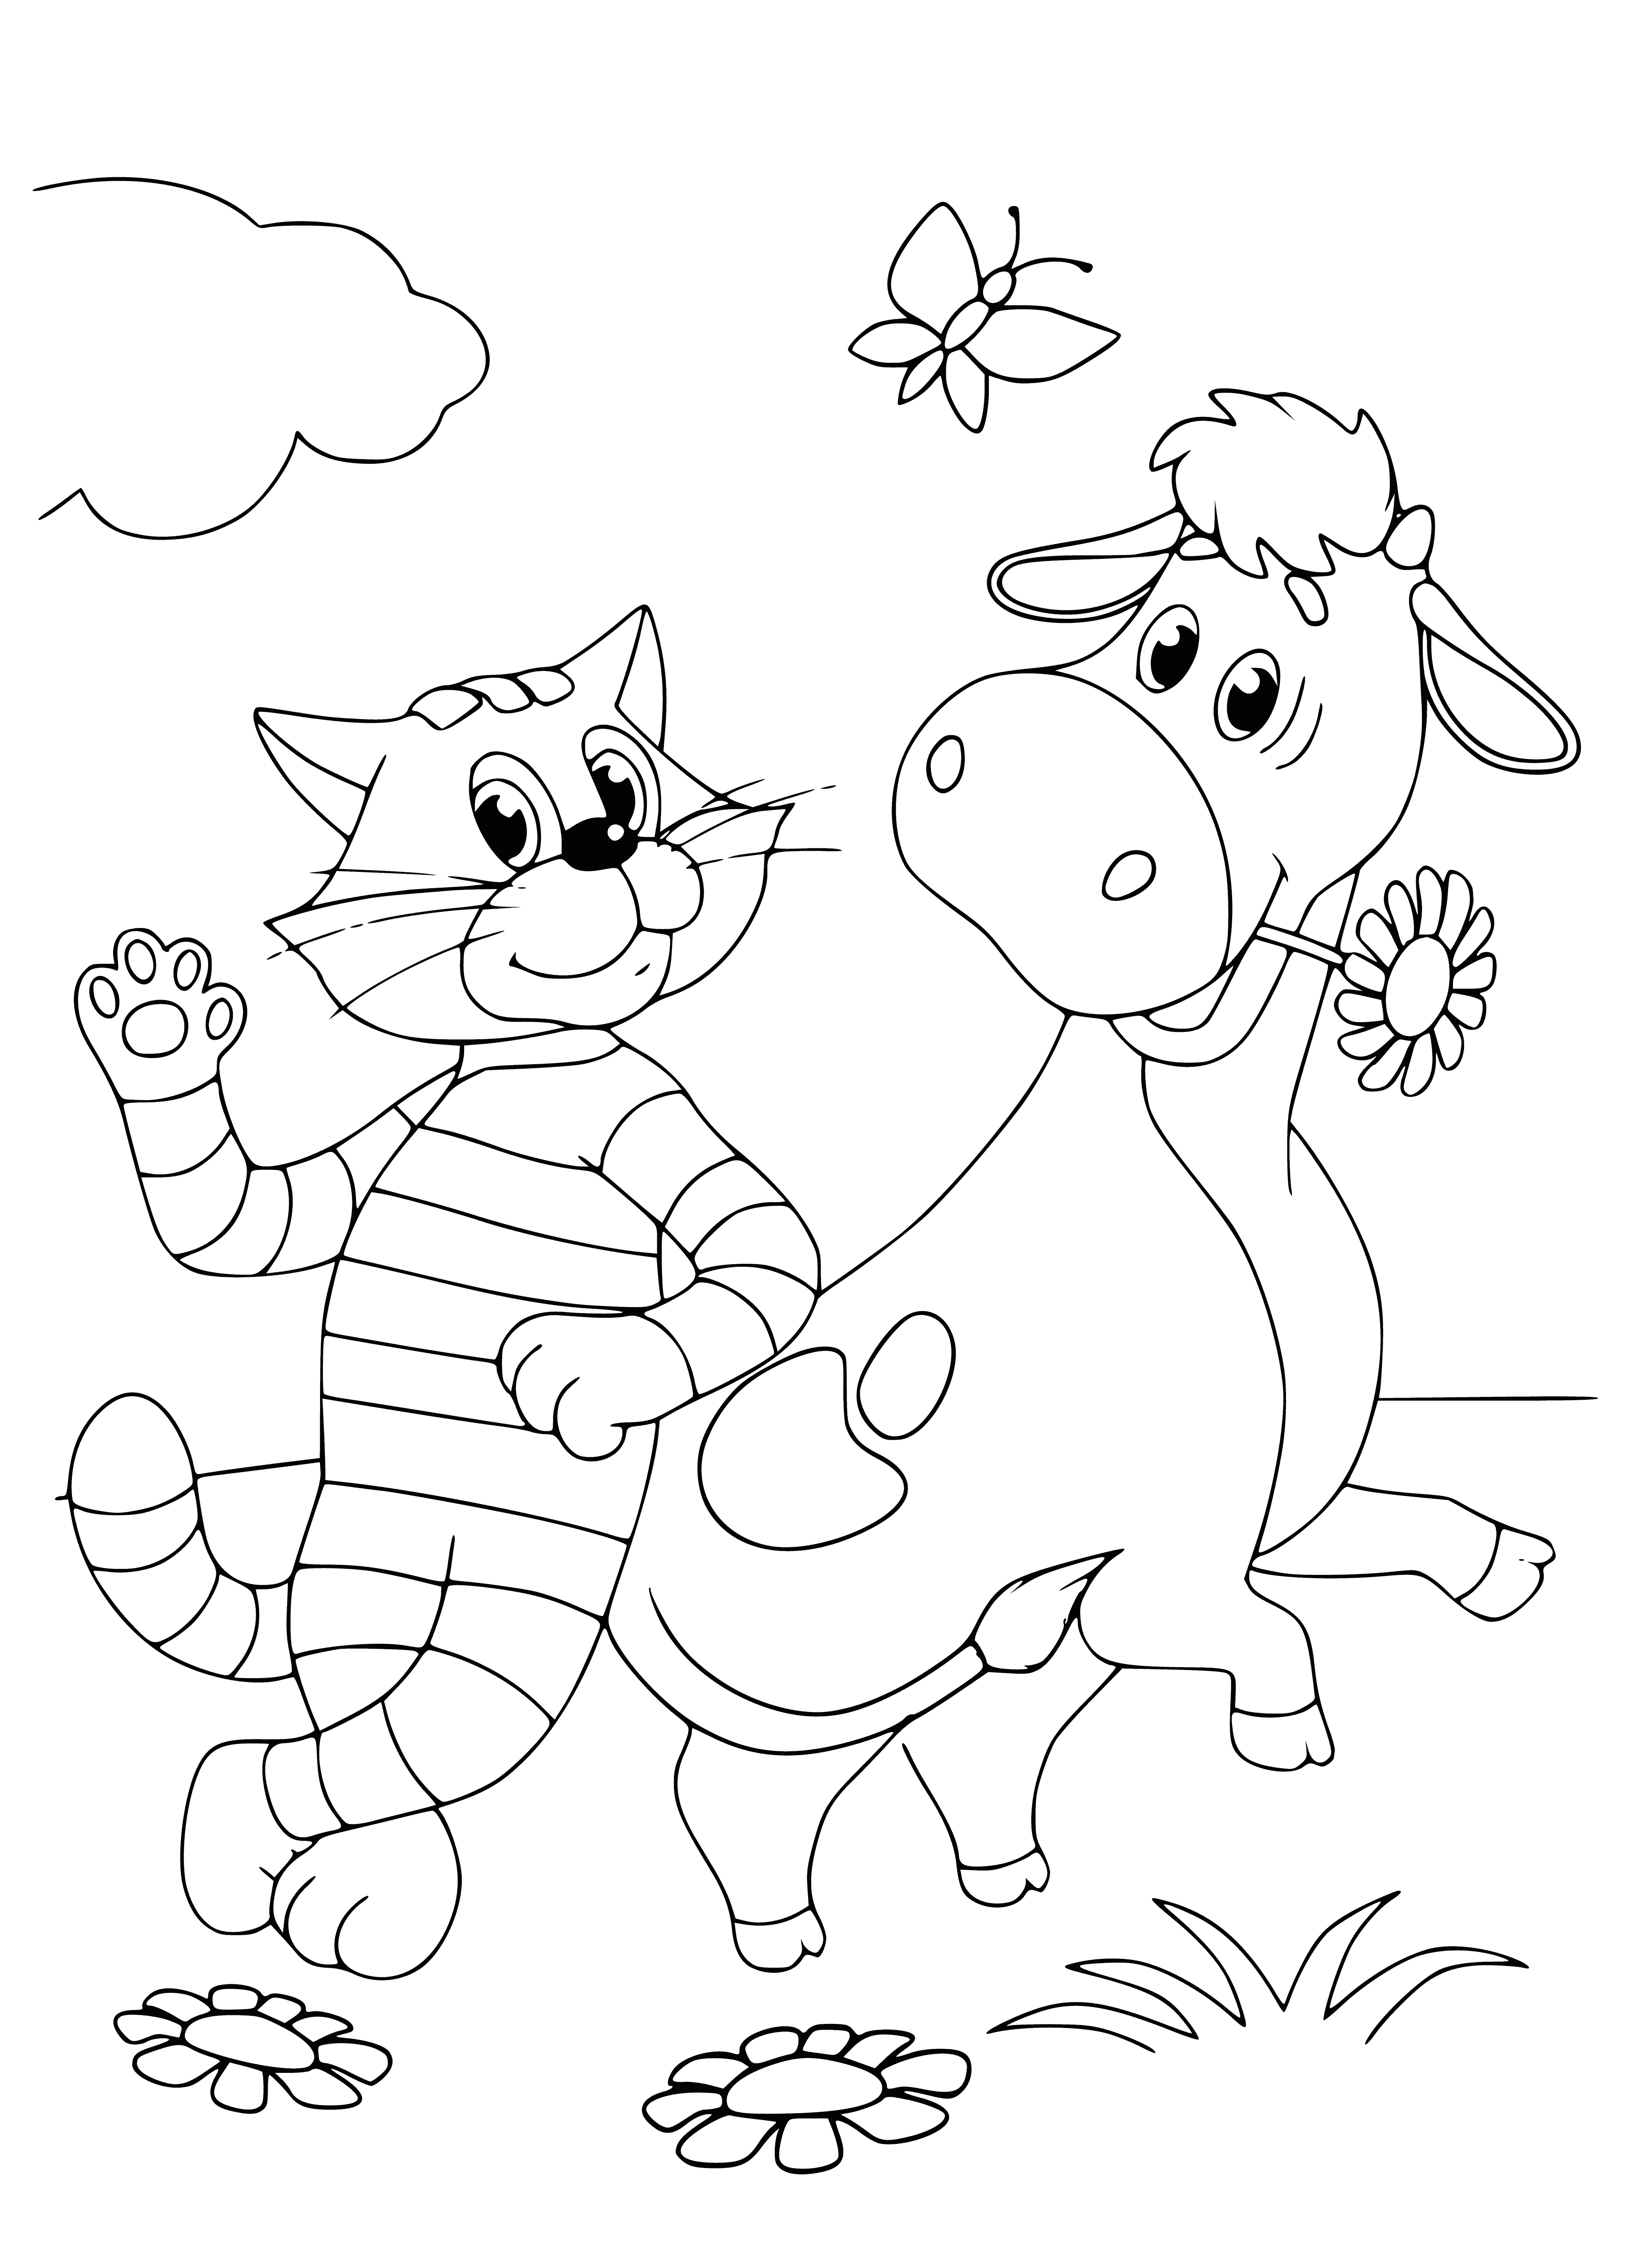 coloring page: Black cat & white calf meet on a dirt road. Cat looks at calf, calf looks at cat with big eyes, wooden cart full of hay nearby.